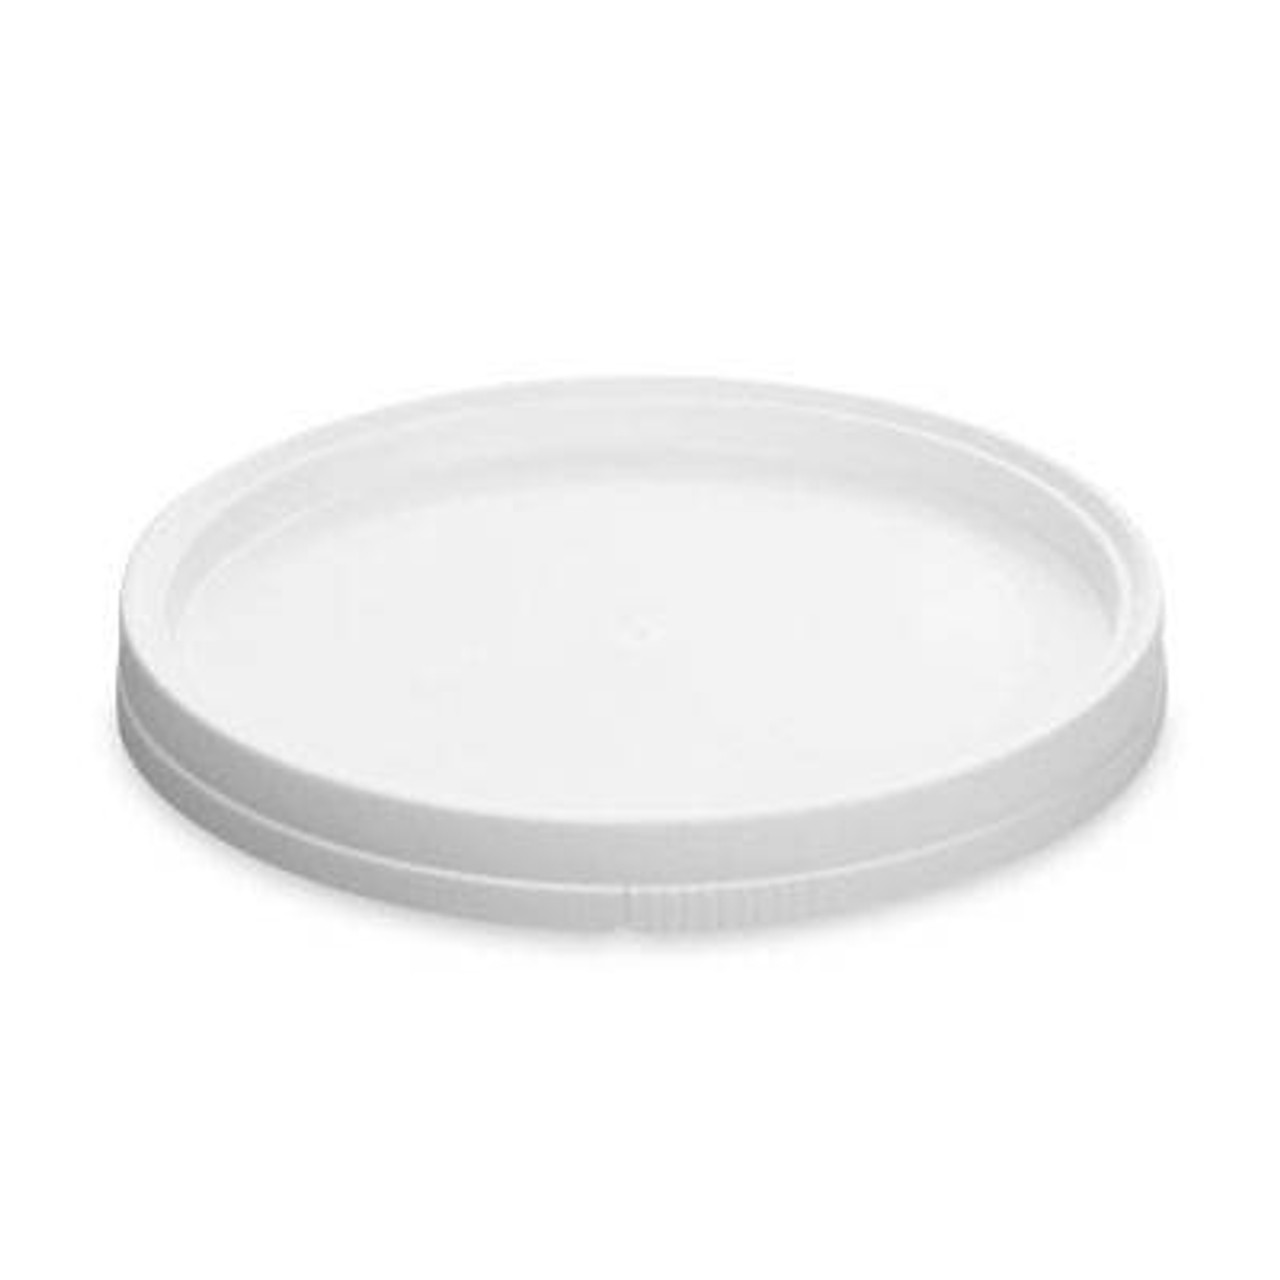 53 oz. Food Grade Flex-off Round Plastic Container (T61053FXCP) - Clarified  (Clear) - 150 count - case